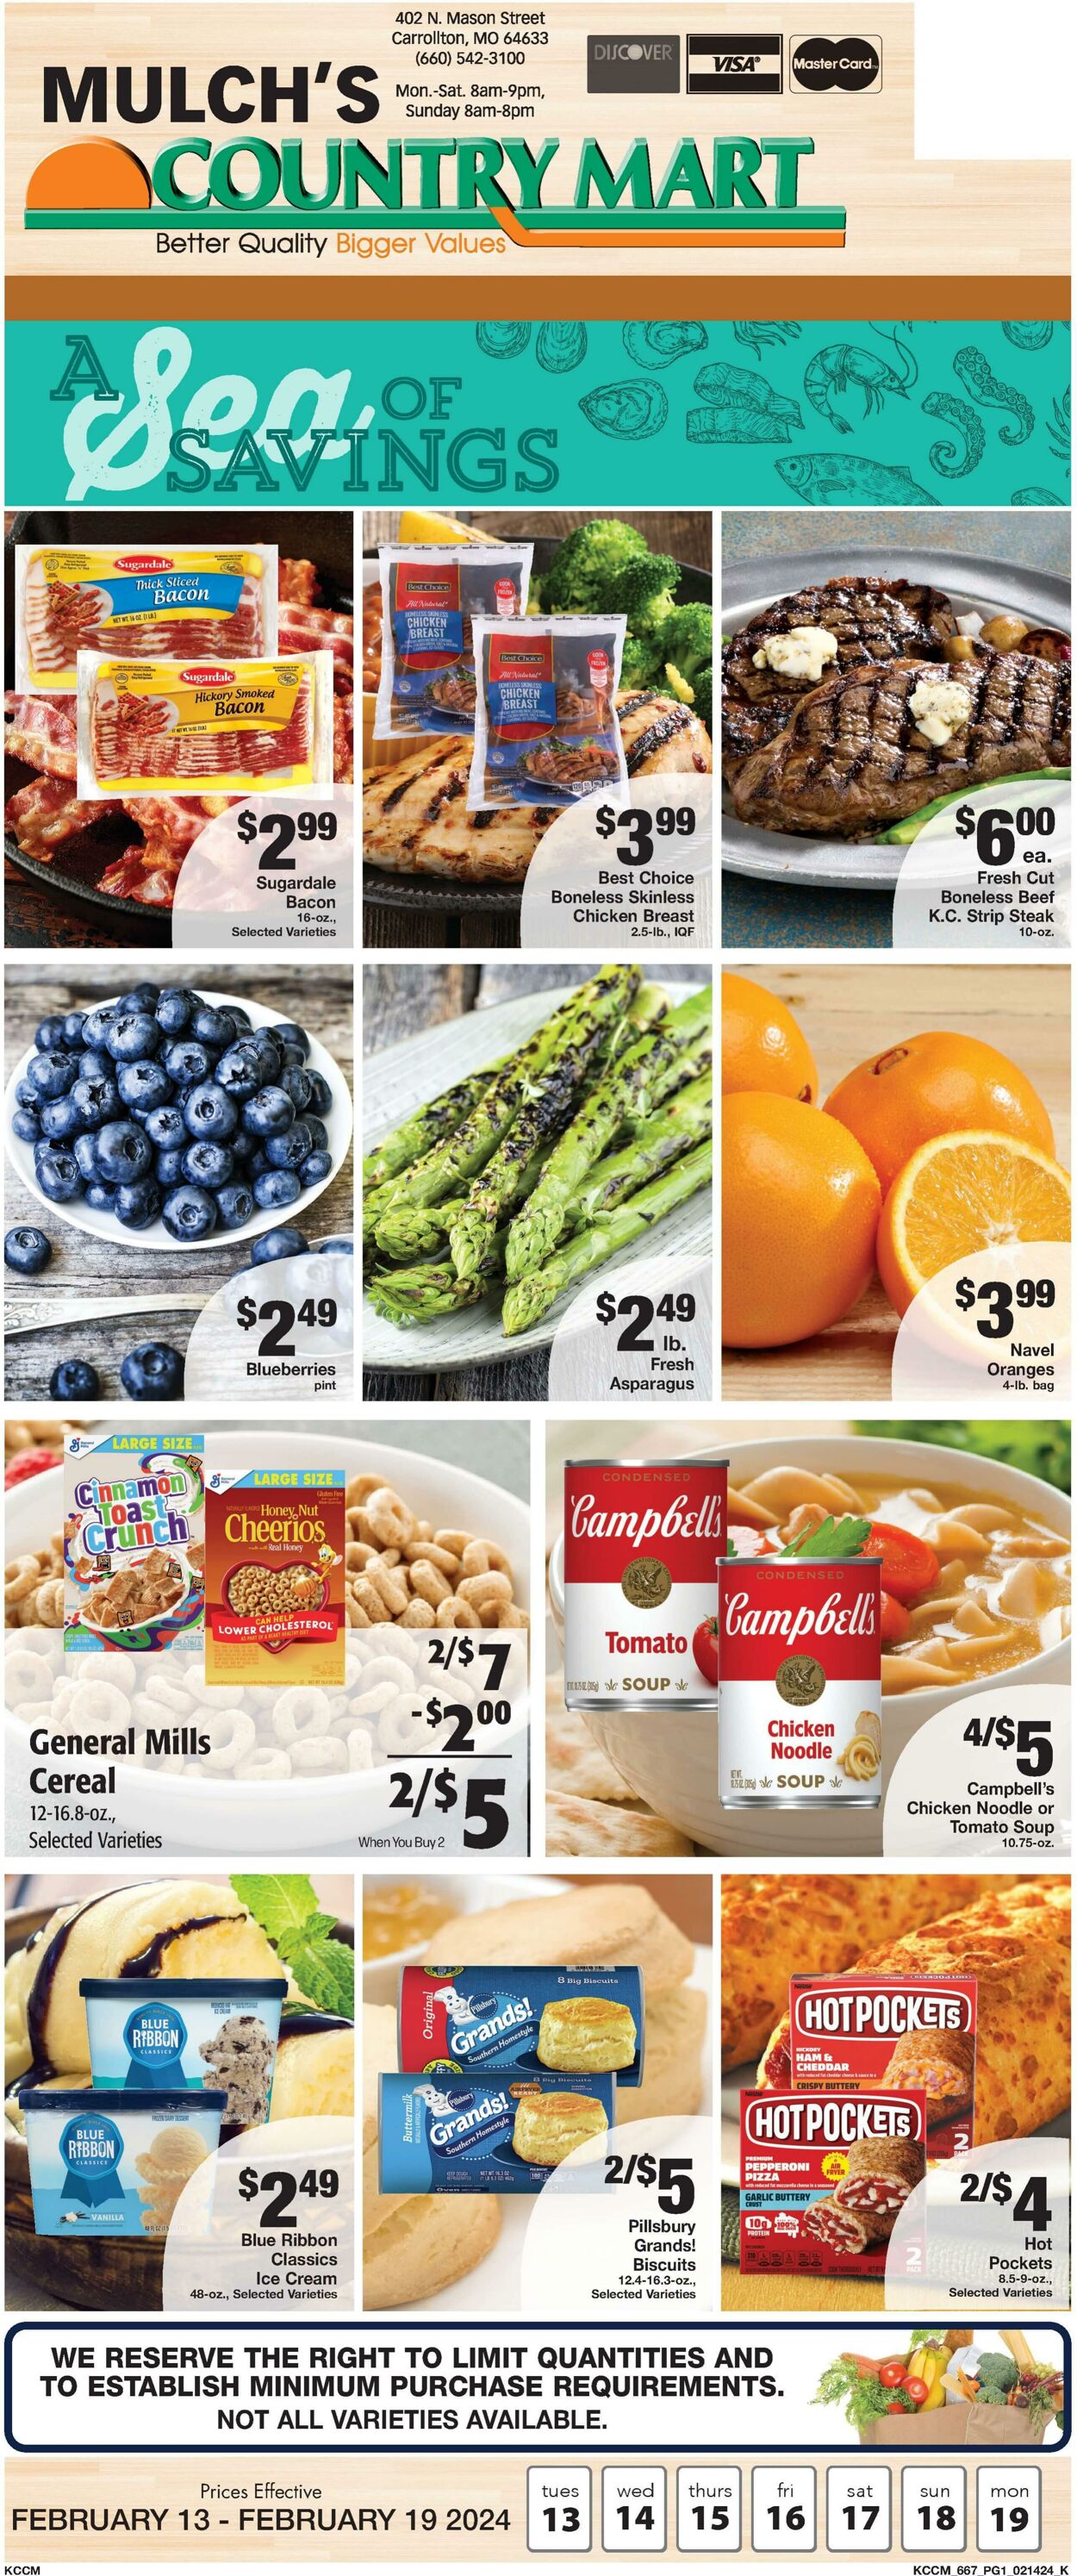 Weekly ad Country Mart 02/13/2024 - 02/19/2024